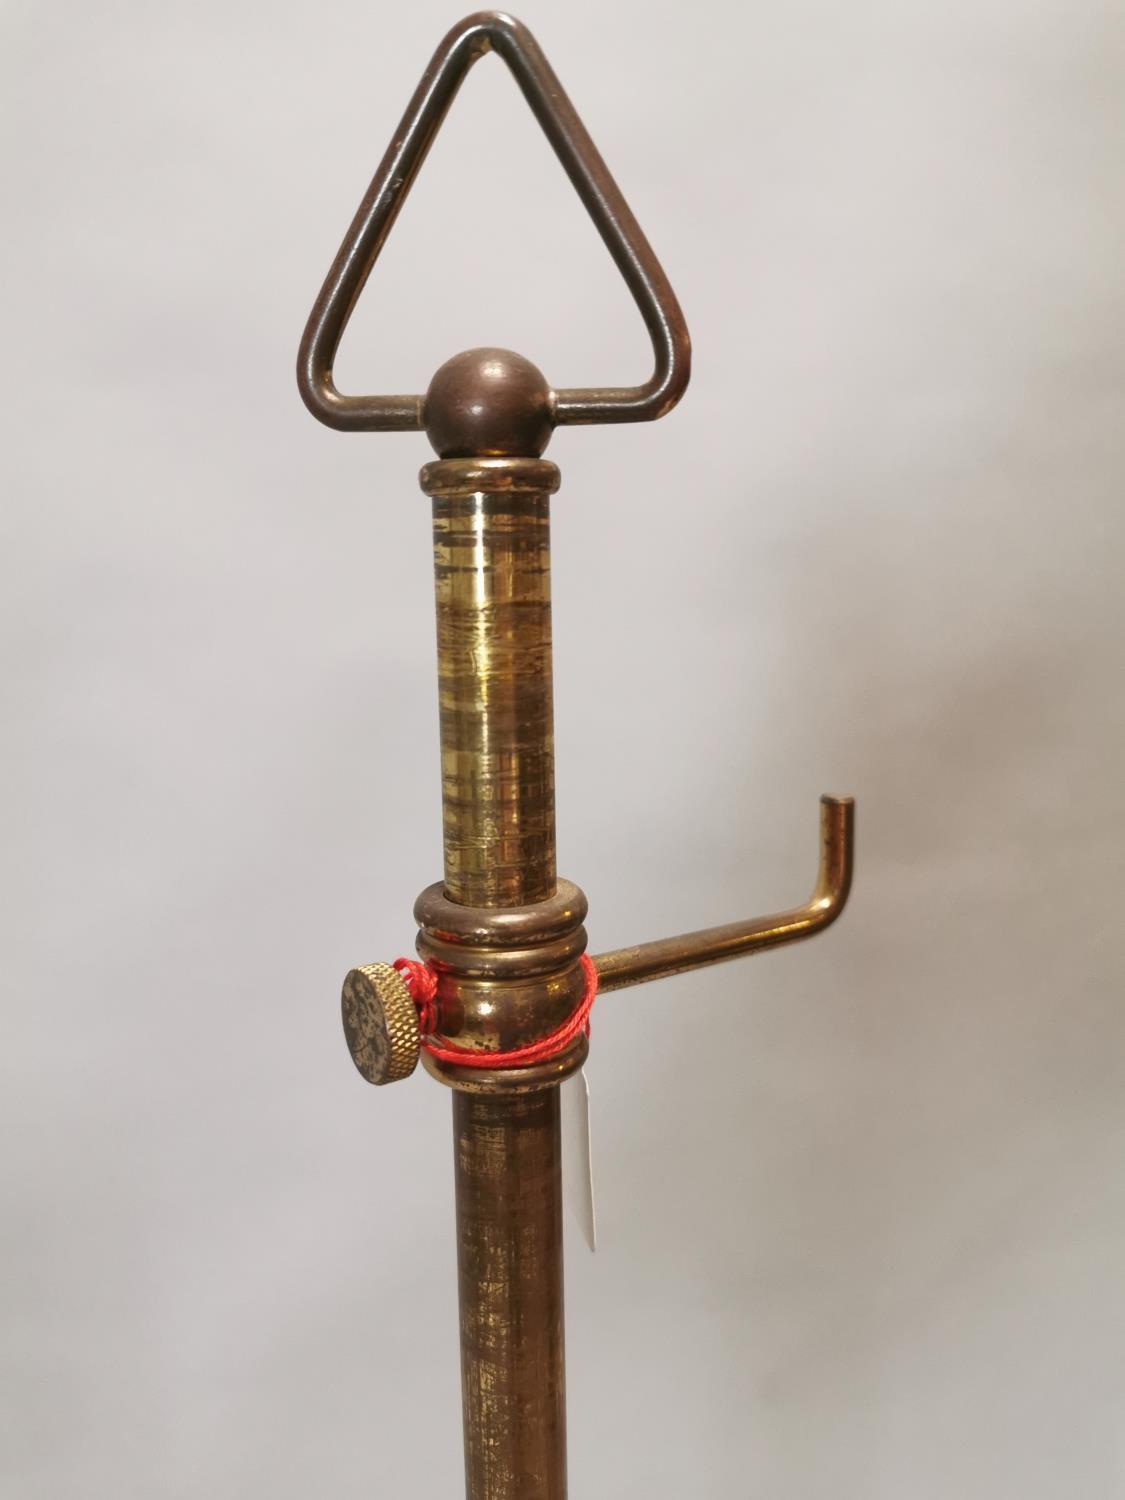 Two early 20th C. brass haberdashery shop hat stands - Image 6 of 8